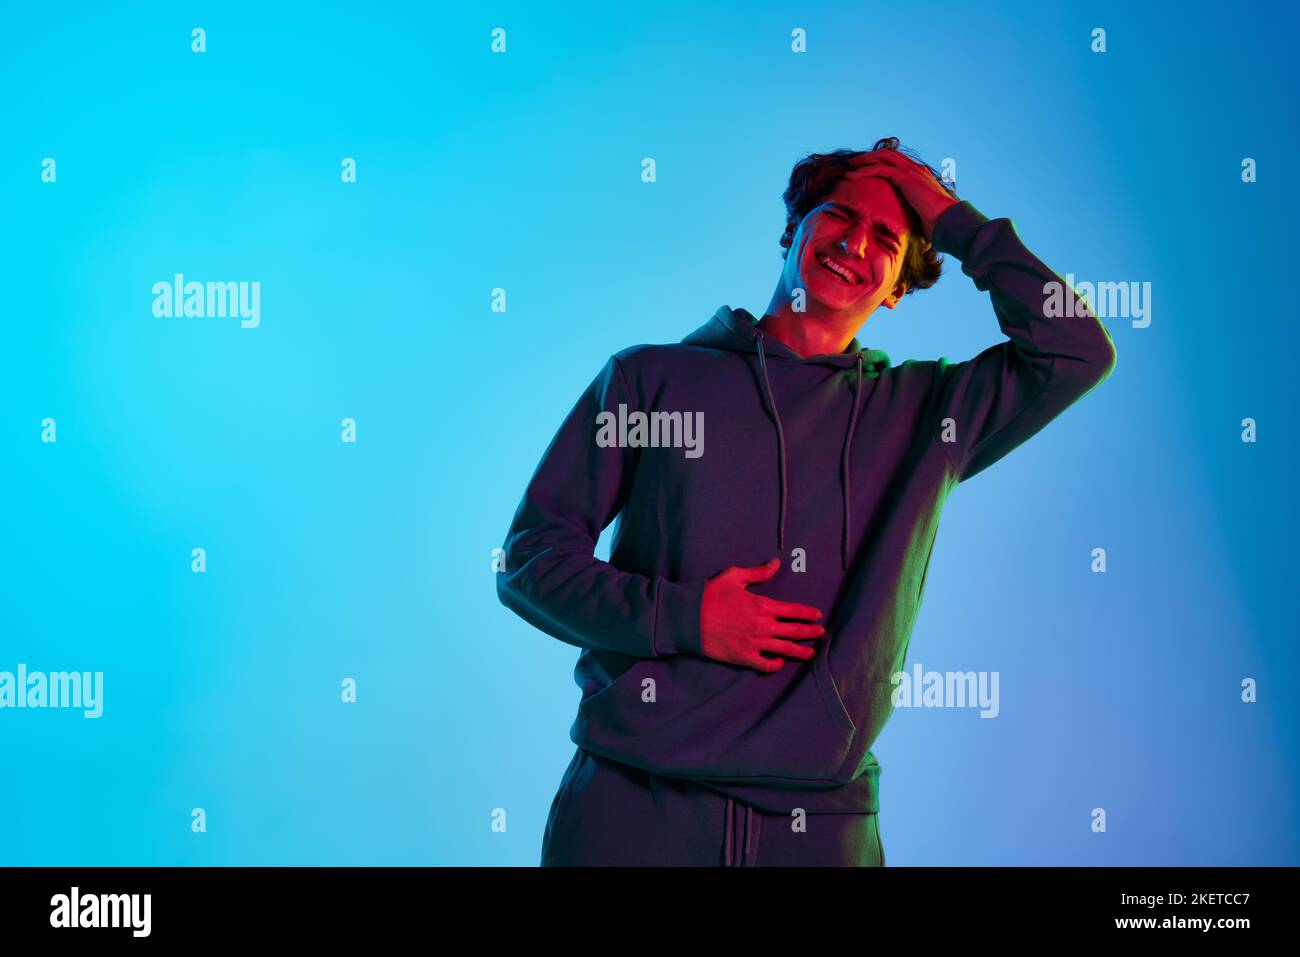 Portrait of young man with curly hair posing, emotively laughing isolated over blue background in neon light. Extremely funny Stock Photo